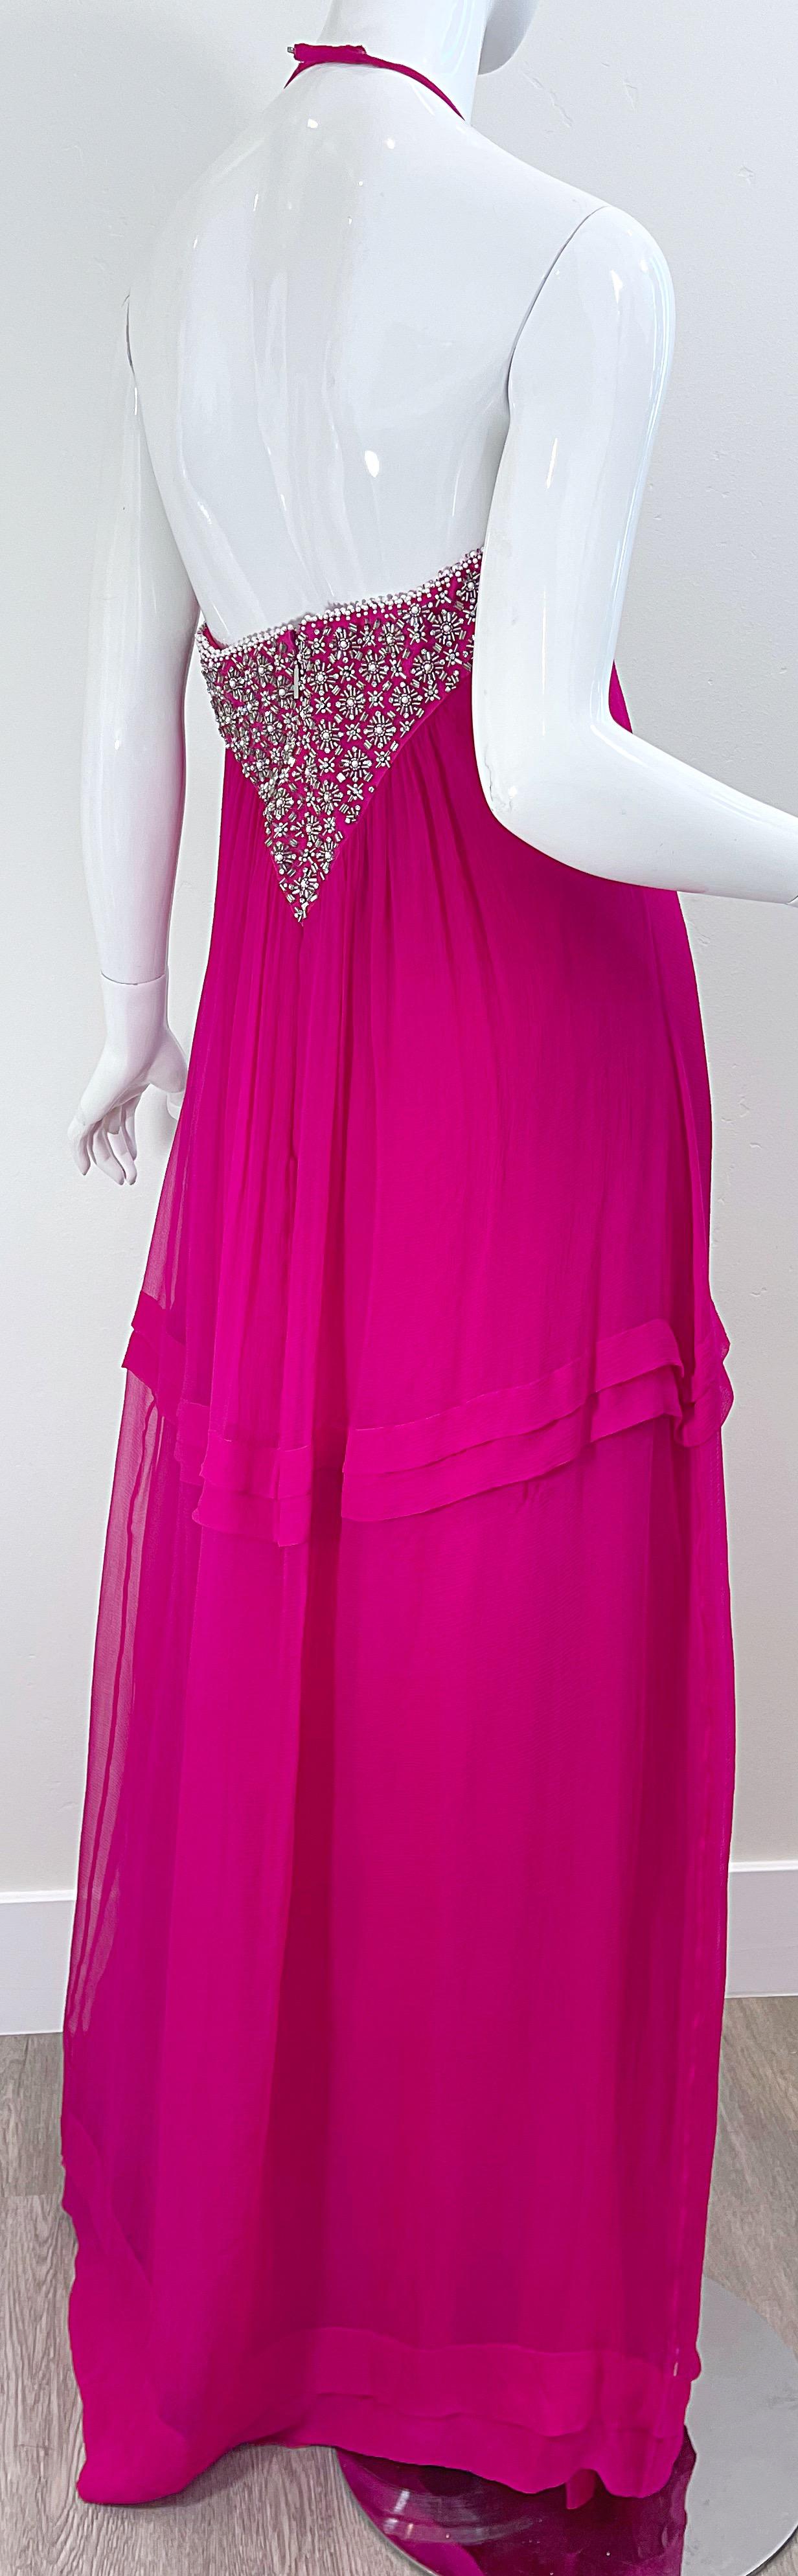 1990s Roberto Cavalli Size 44 / US 8 Hot Pink Chiffon Beaded Rhinestone 90s Gown For Sale 2